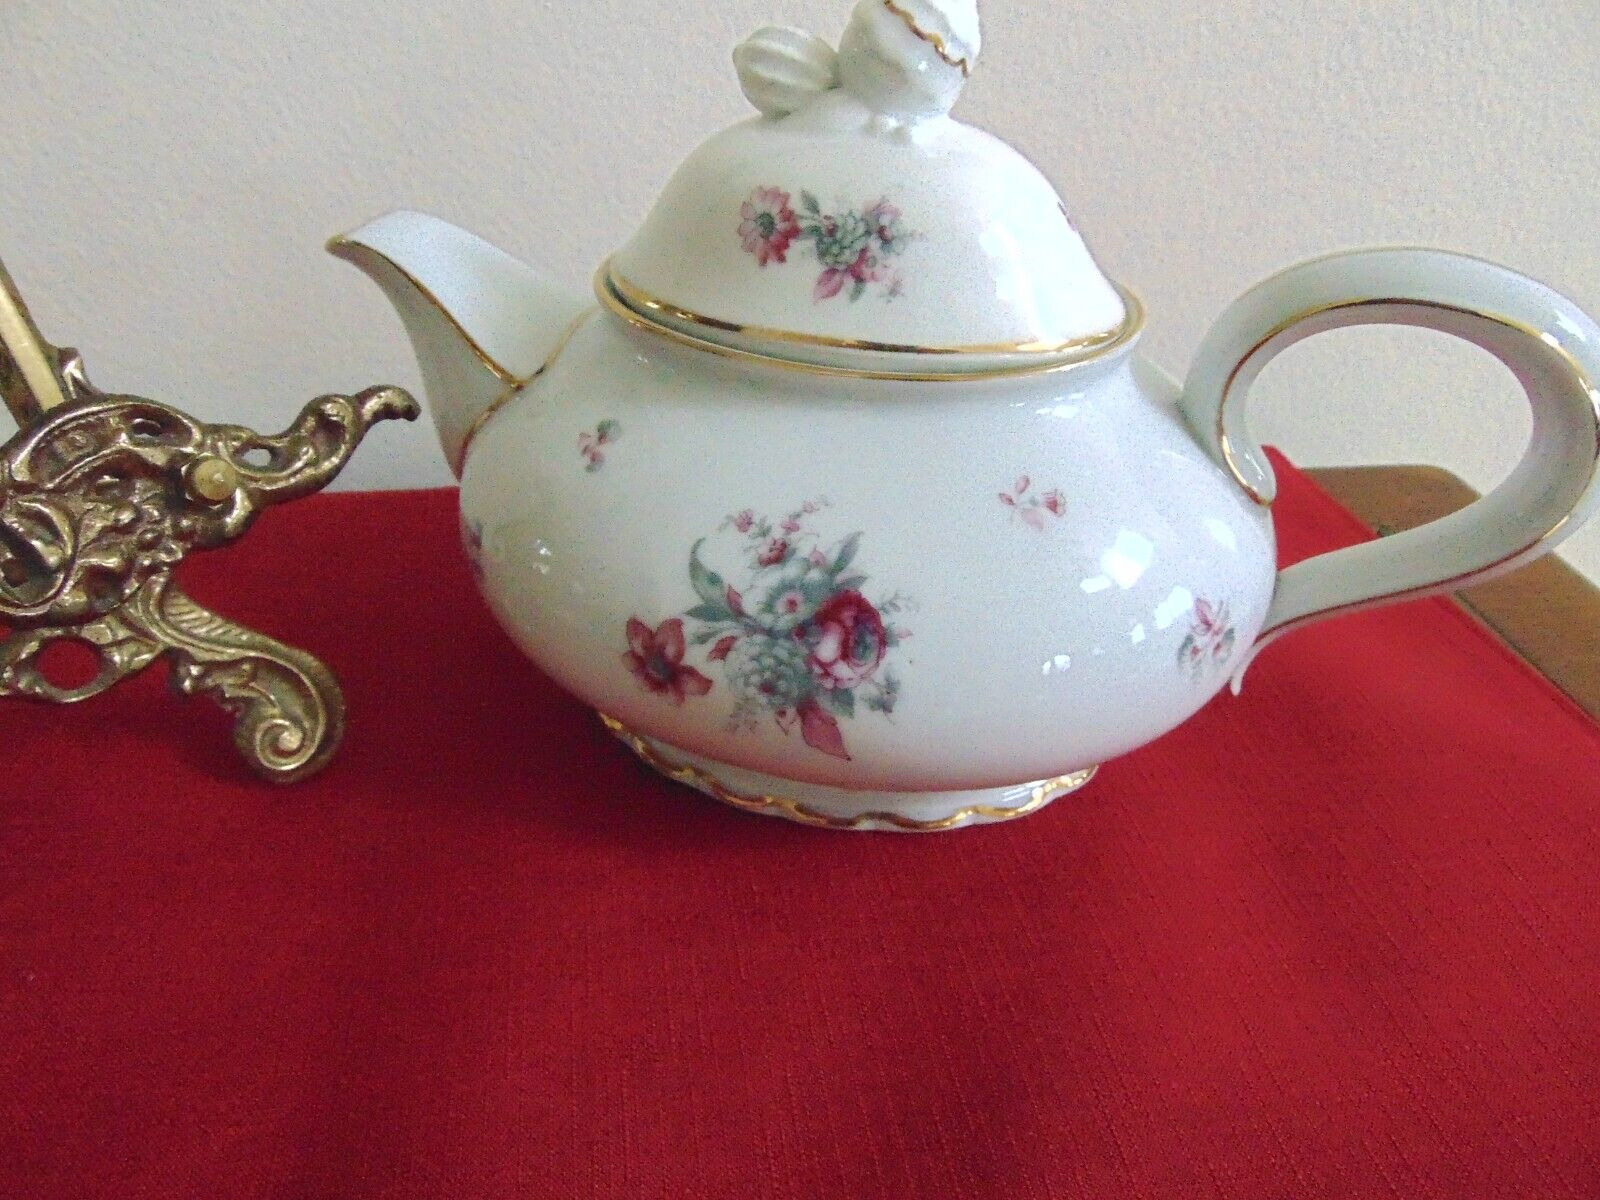 PAUL MULLER SELB TEAPOT-OVAL BERRY & GRAY BOSSOMS & FOLIAGE-GOLD TRIM CIRCA 1919